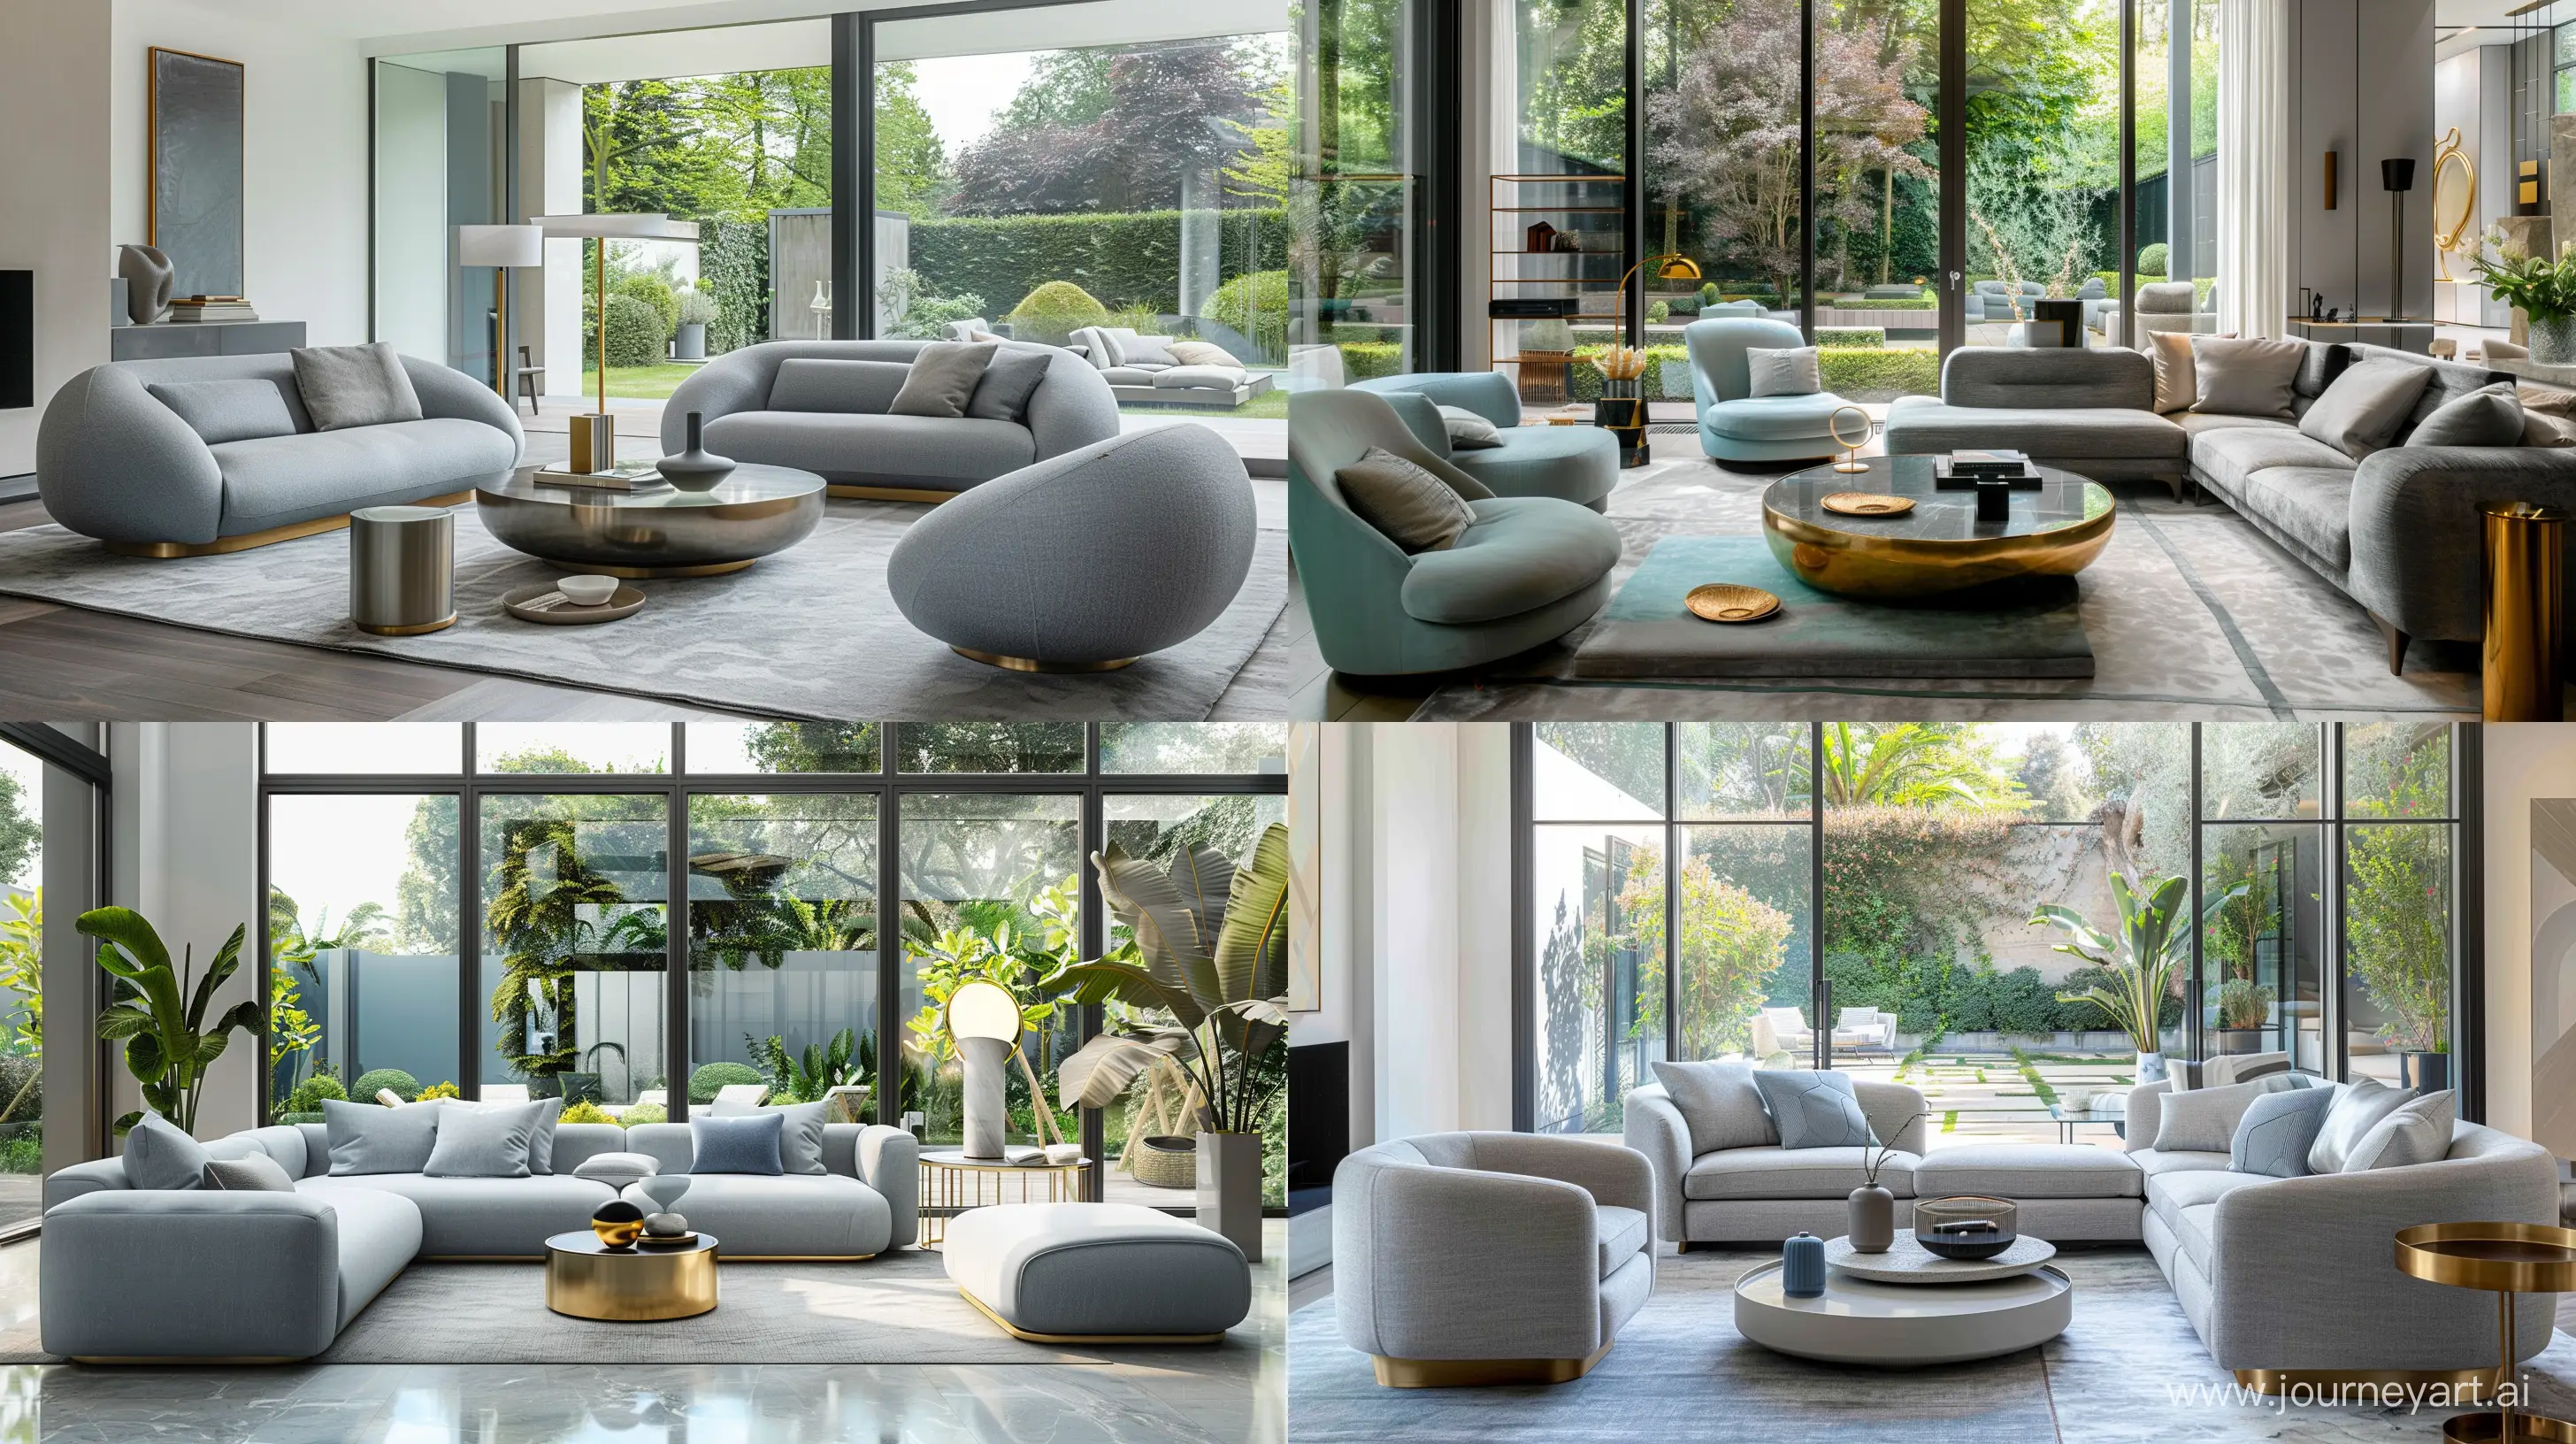 A contemporary living room bathed in natural light, featuring sleek modern furniture in shades of cool grey and soft blue. Picture large windows overlooking a serene garden, with accents of metallic gold adding a touch of luxury. --ar 16:9